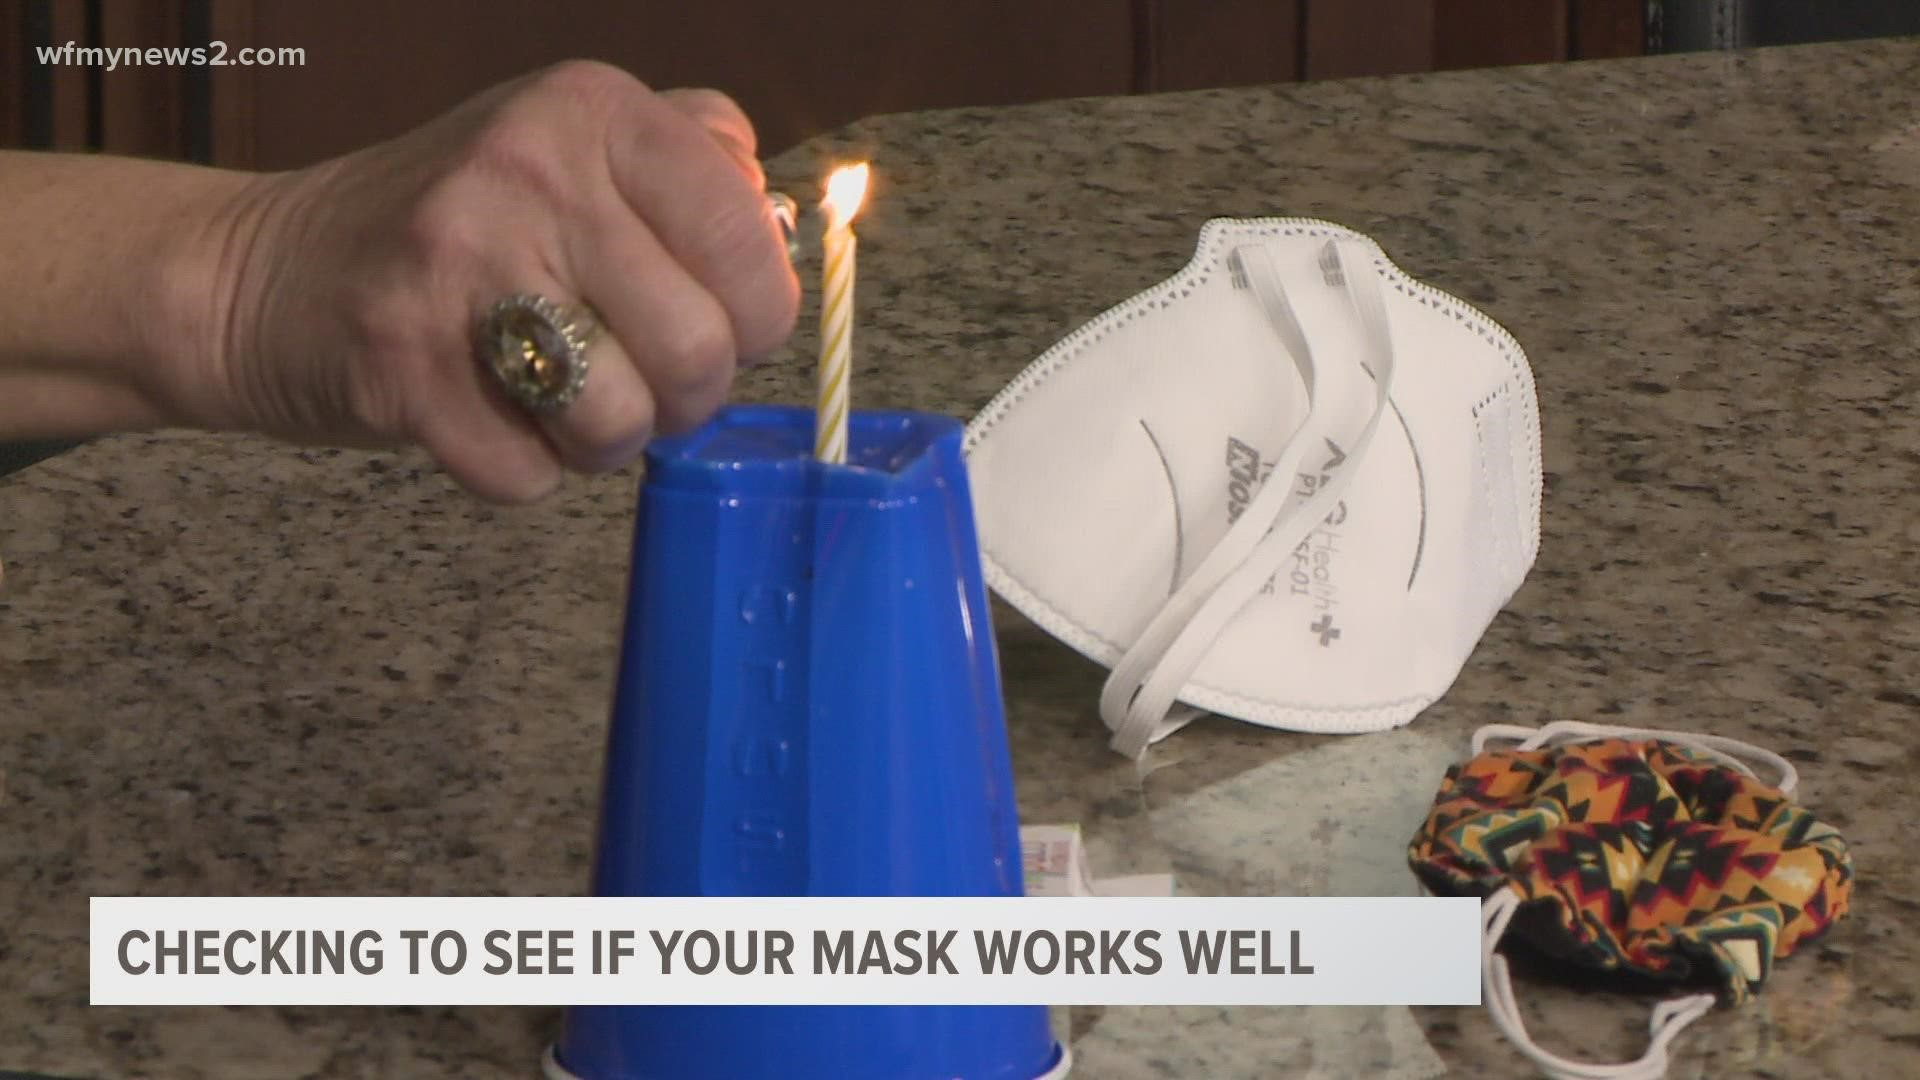 Experts said the type of mask you choose could influence how much protection you have